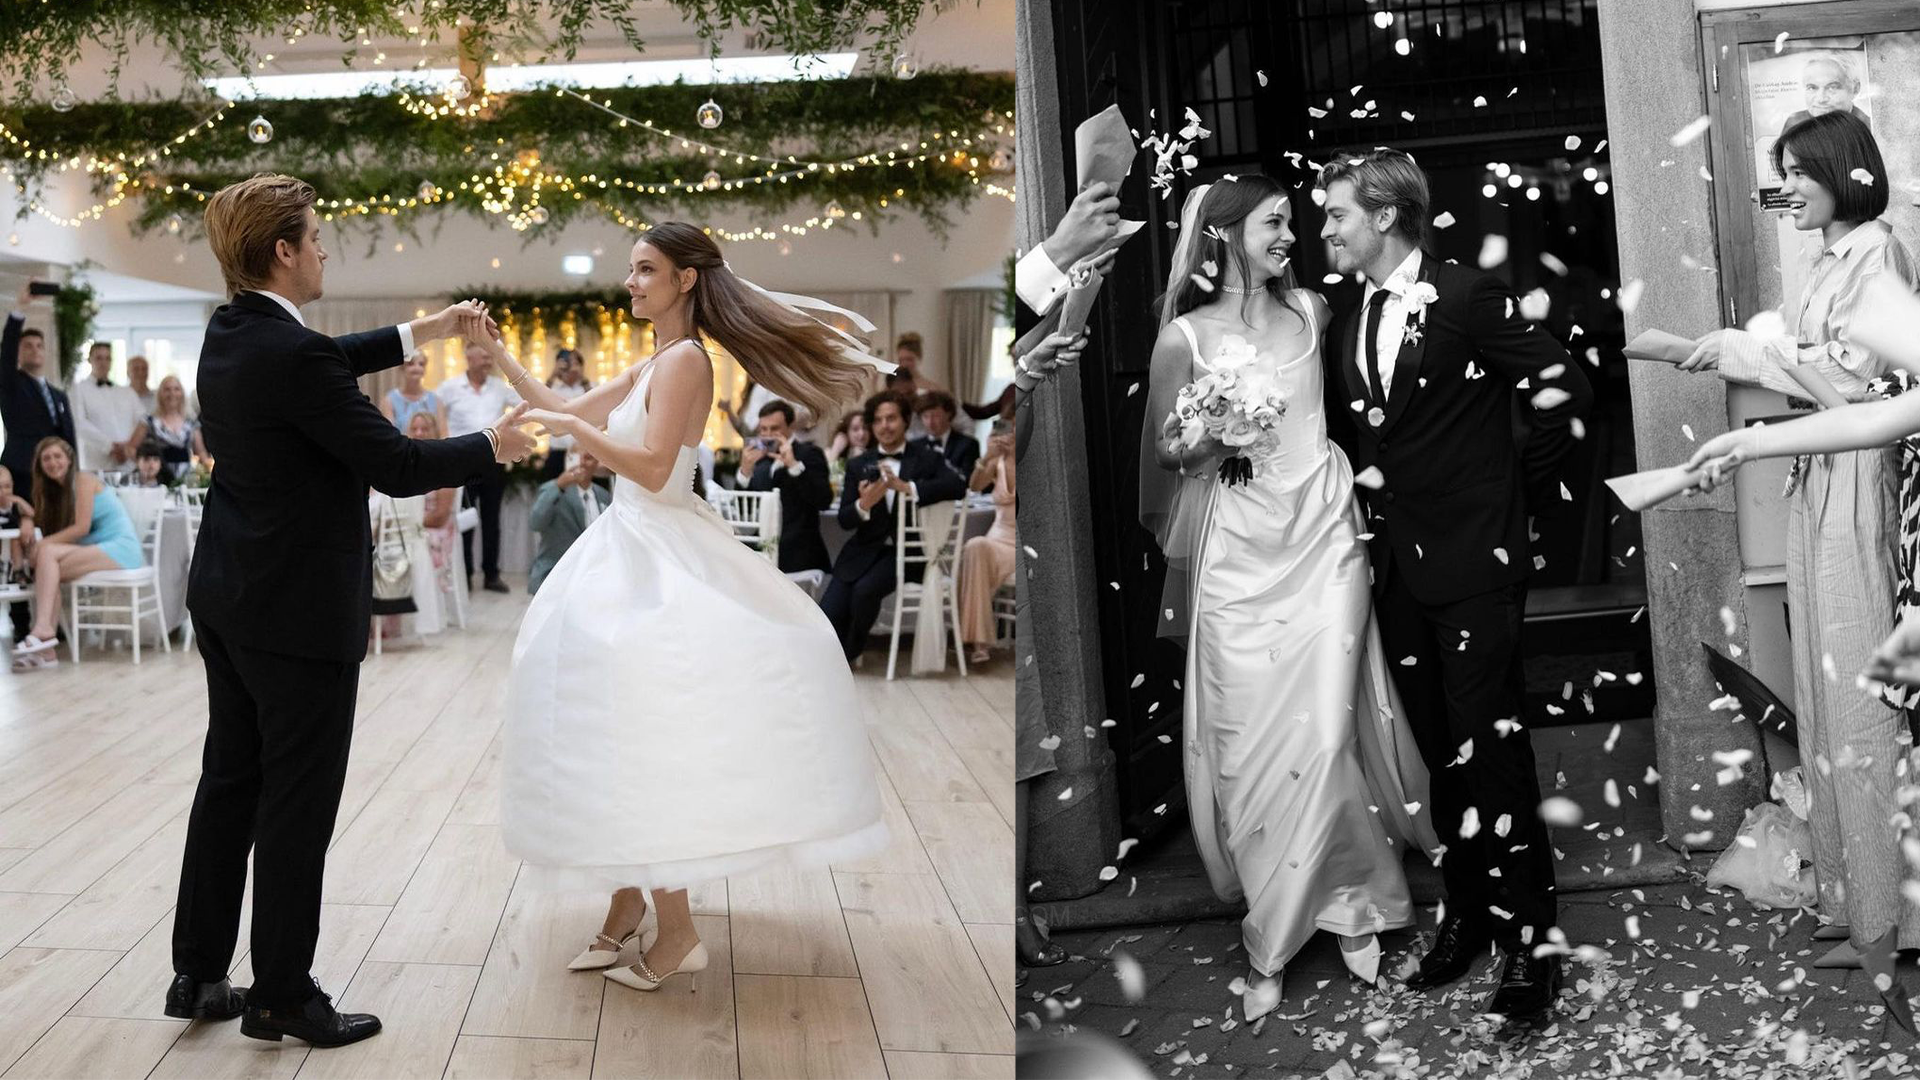 Barbara Palvin and Dylan Sprouse wedding